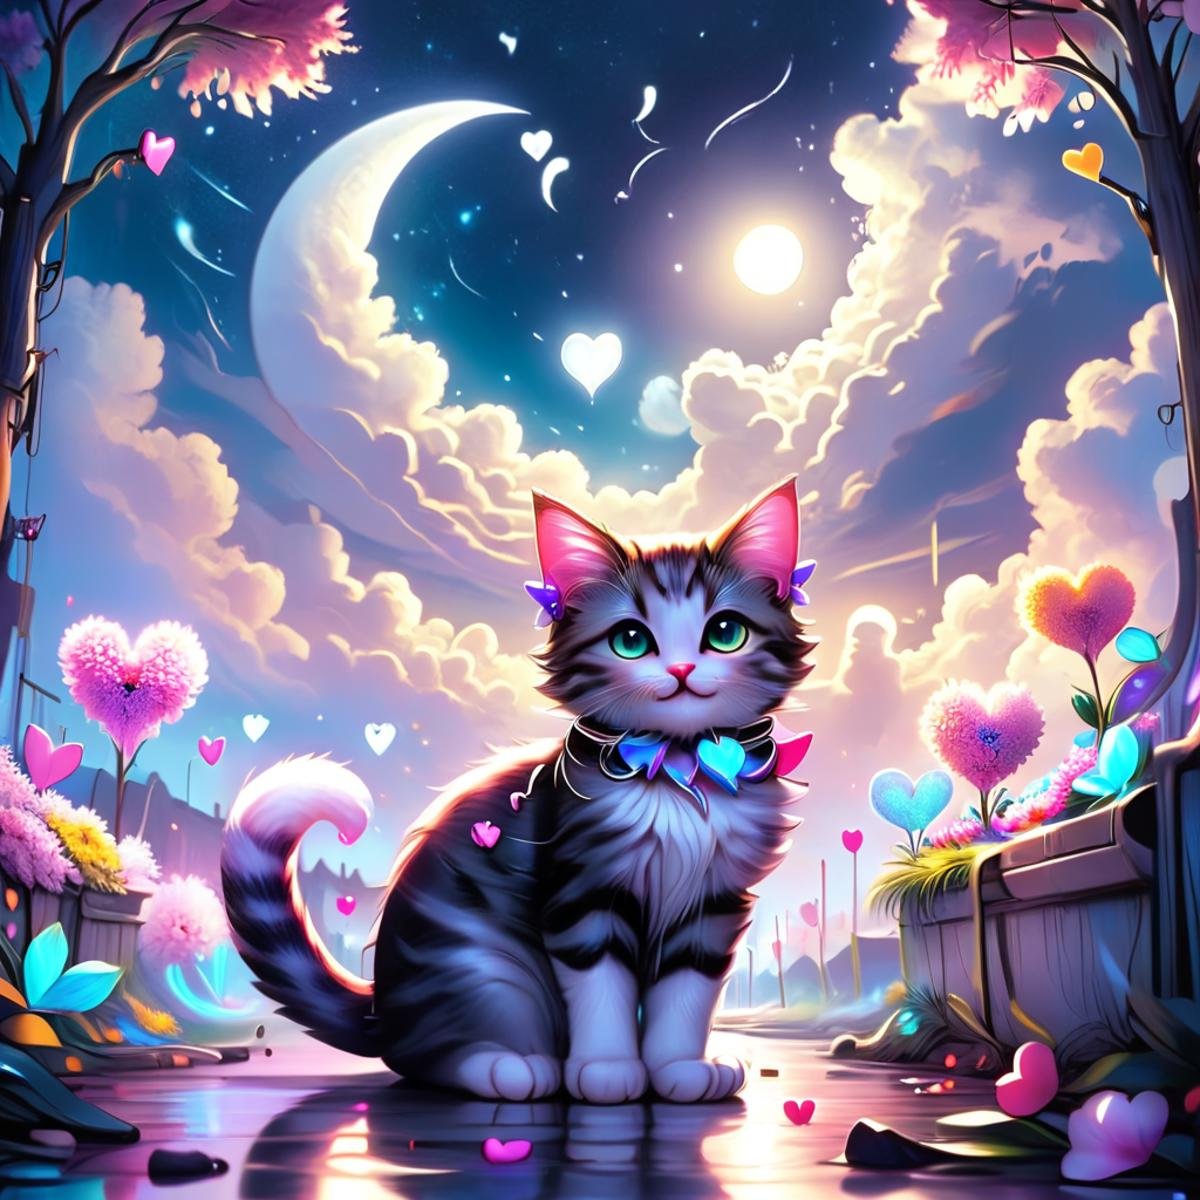 ValentineNatureStyleSDXL,no humans, flowers, water, plant, fantasy, petals, full moon, moon, cloud, colorful, hearts, outdoors, Darling, cute cat animal, sunlight, crescent moon, <lora:ValentineNatureStyleSDXL:1> 